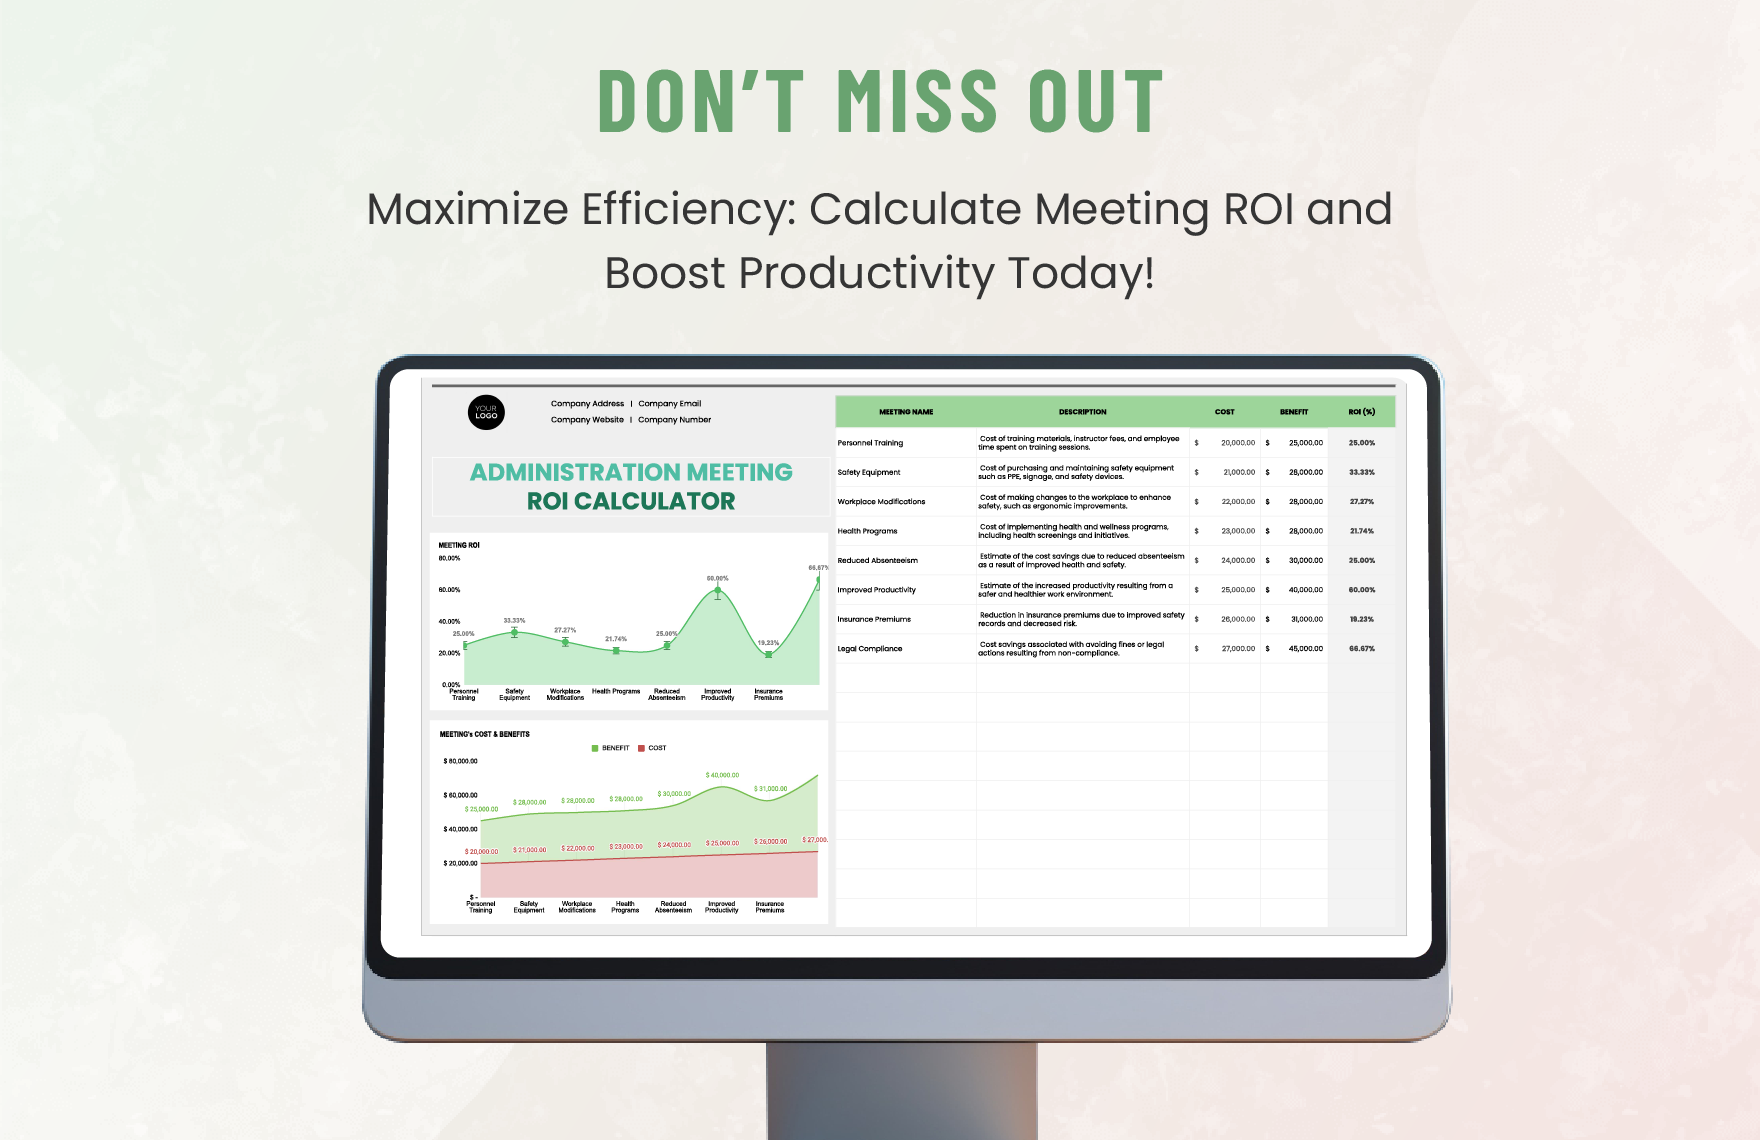 Administration Meeting ROI Calculator Template